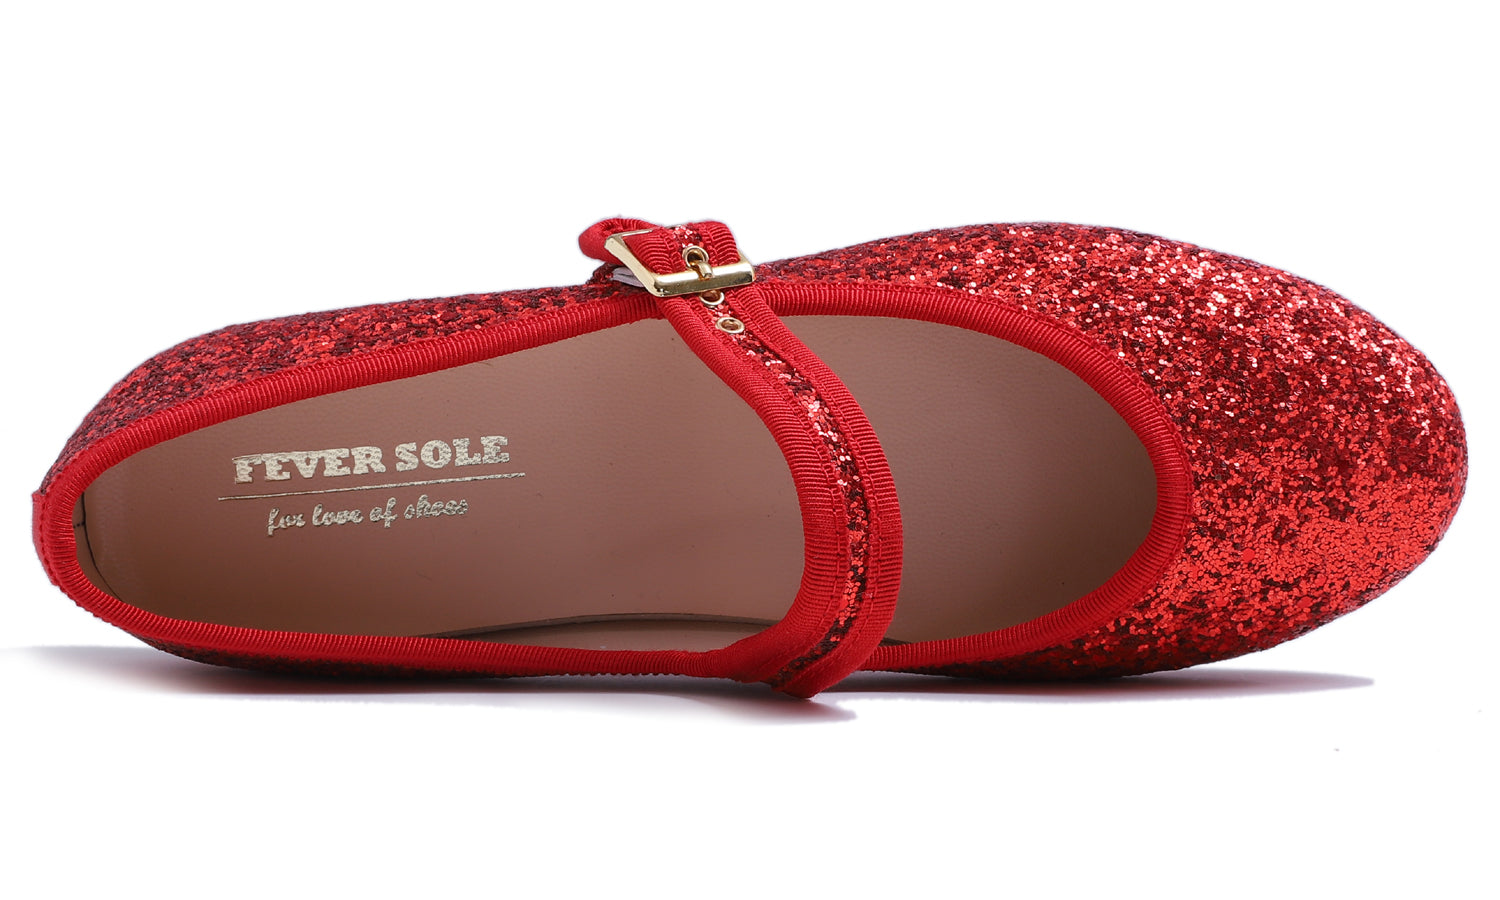 Feversole Women's Soft Cushion Extra Padded Comfort Round Toe Mary Jane Metal Buckle Fashion Ballet Flats Walking Shoes Red Glitter